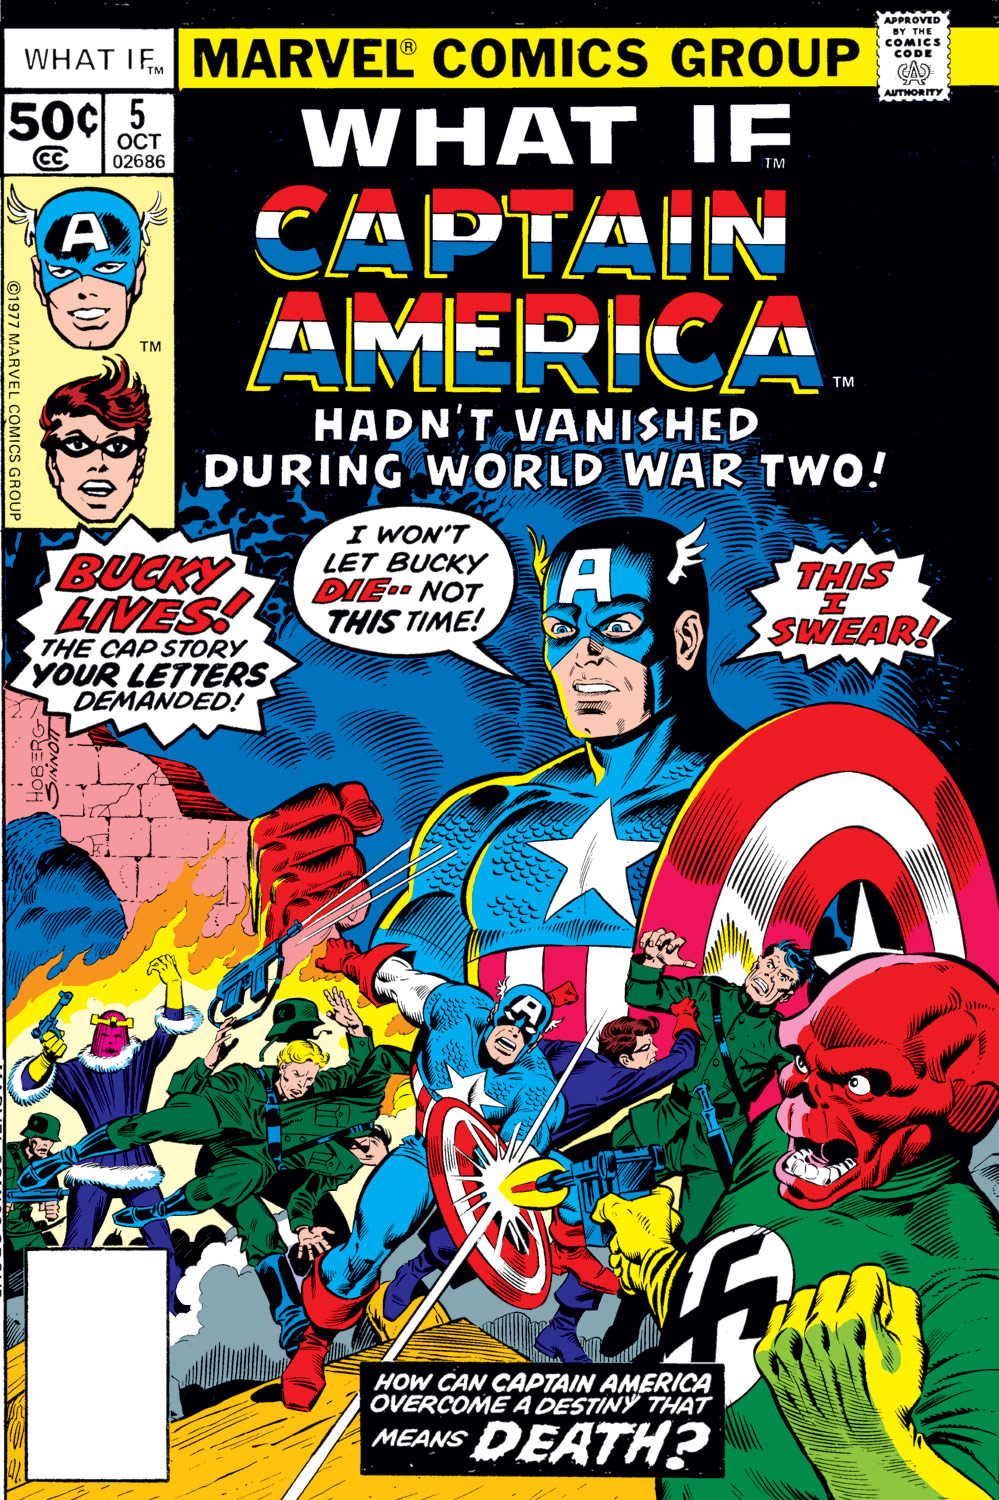 Read online What If? (1977) comic -  Issue #5 - Captain America hadn't vanished during World War Two - 1